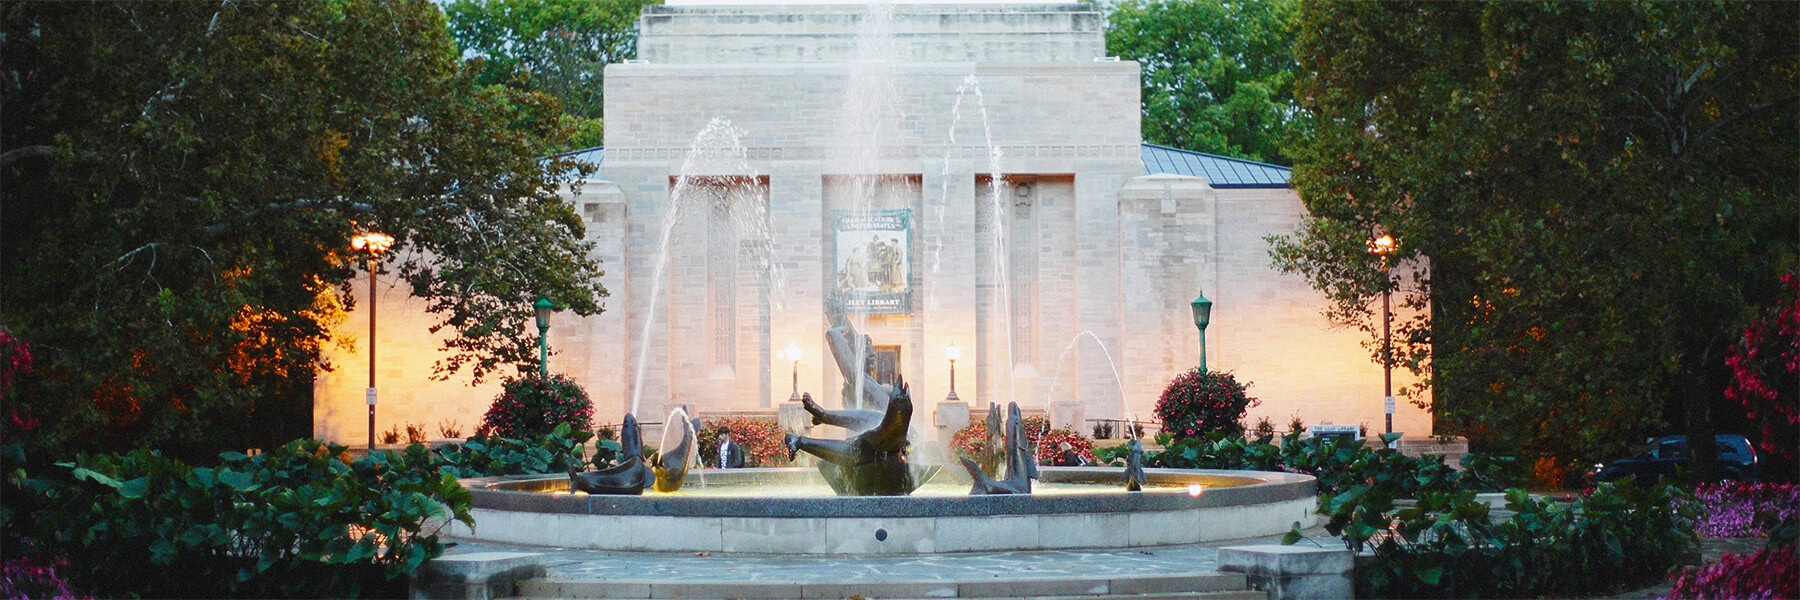 Showalter Fountain facing Lilly Library